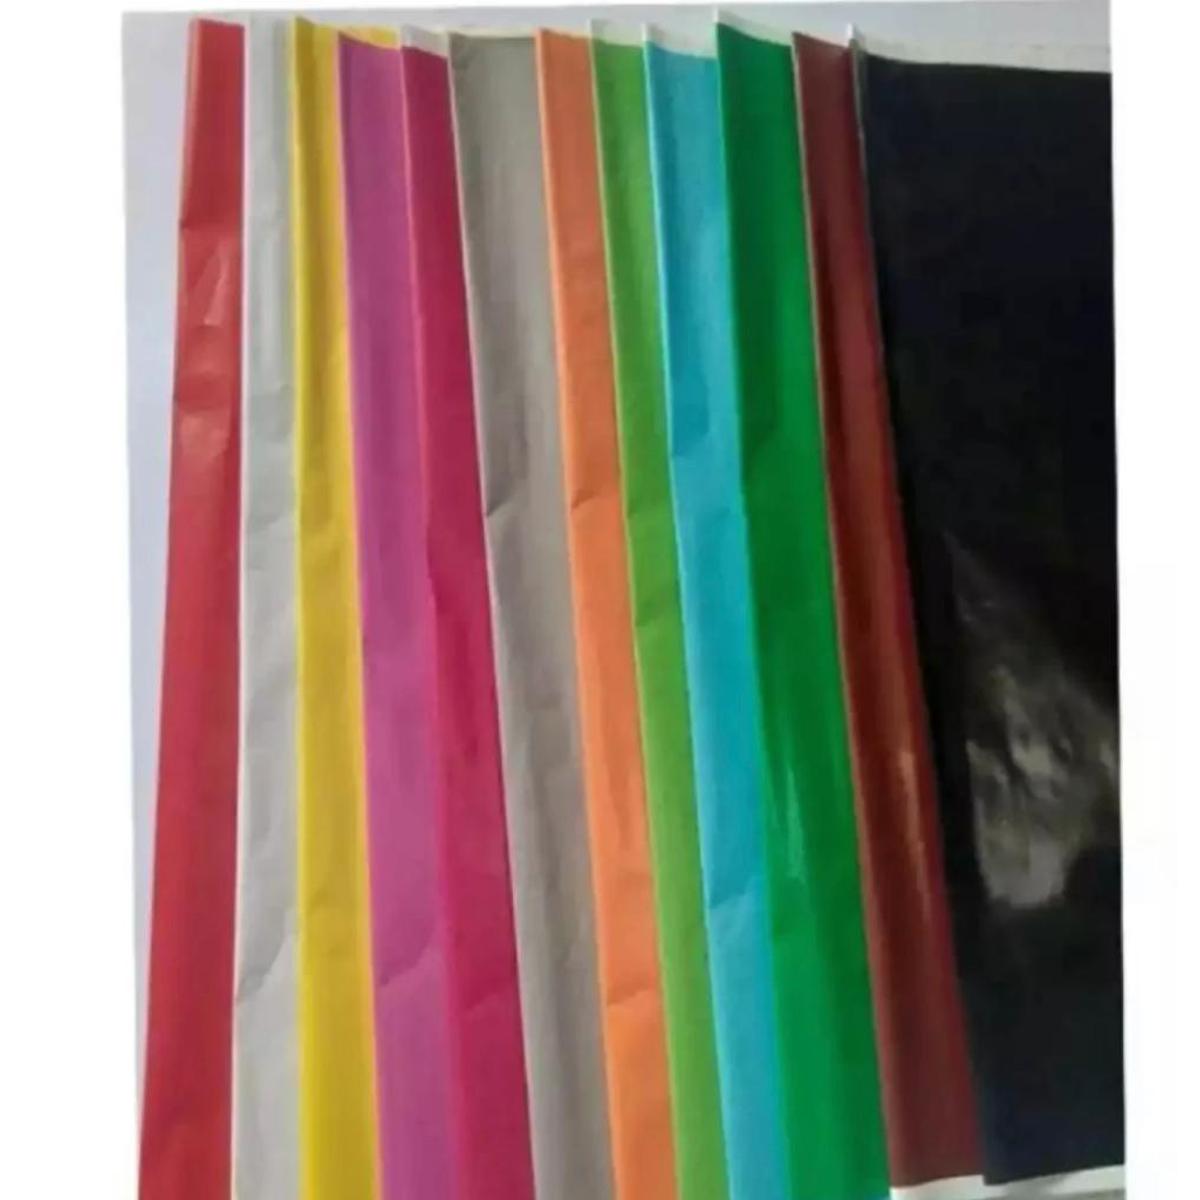 Handmade Paper Bags In Coimbatore - Prices, Manufacturers & Suppliers